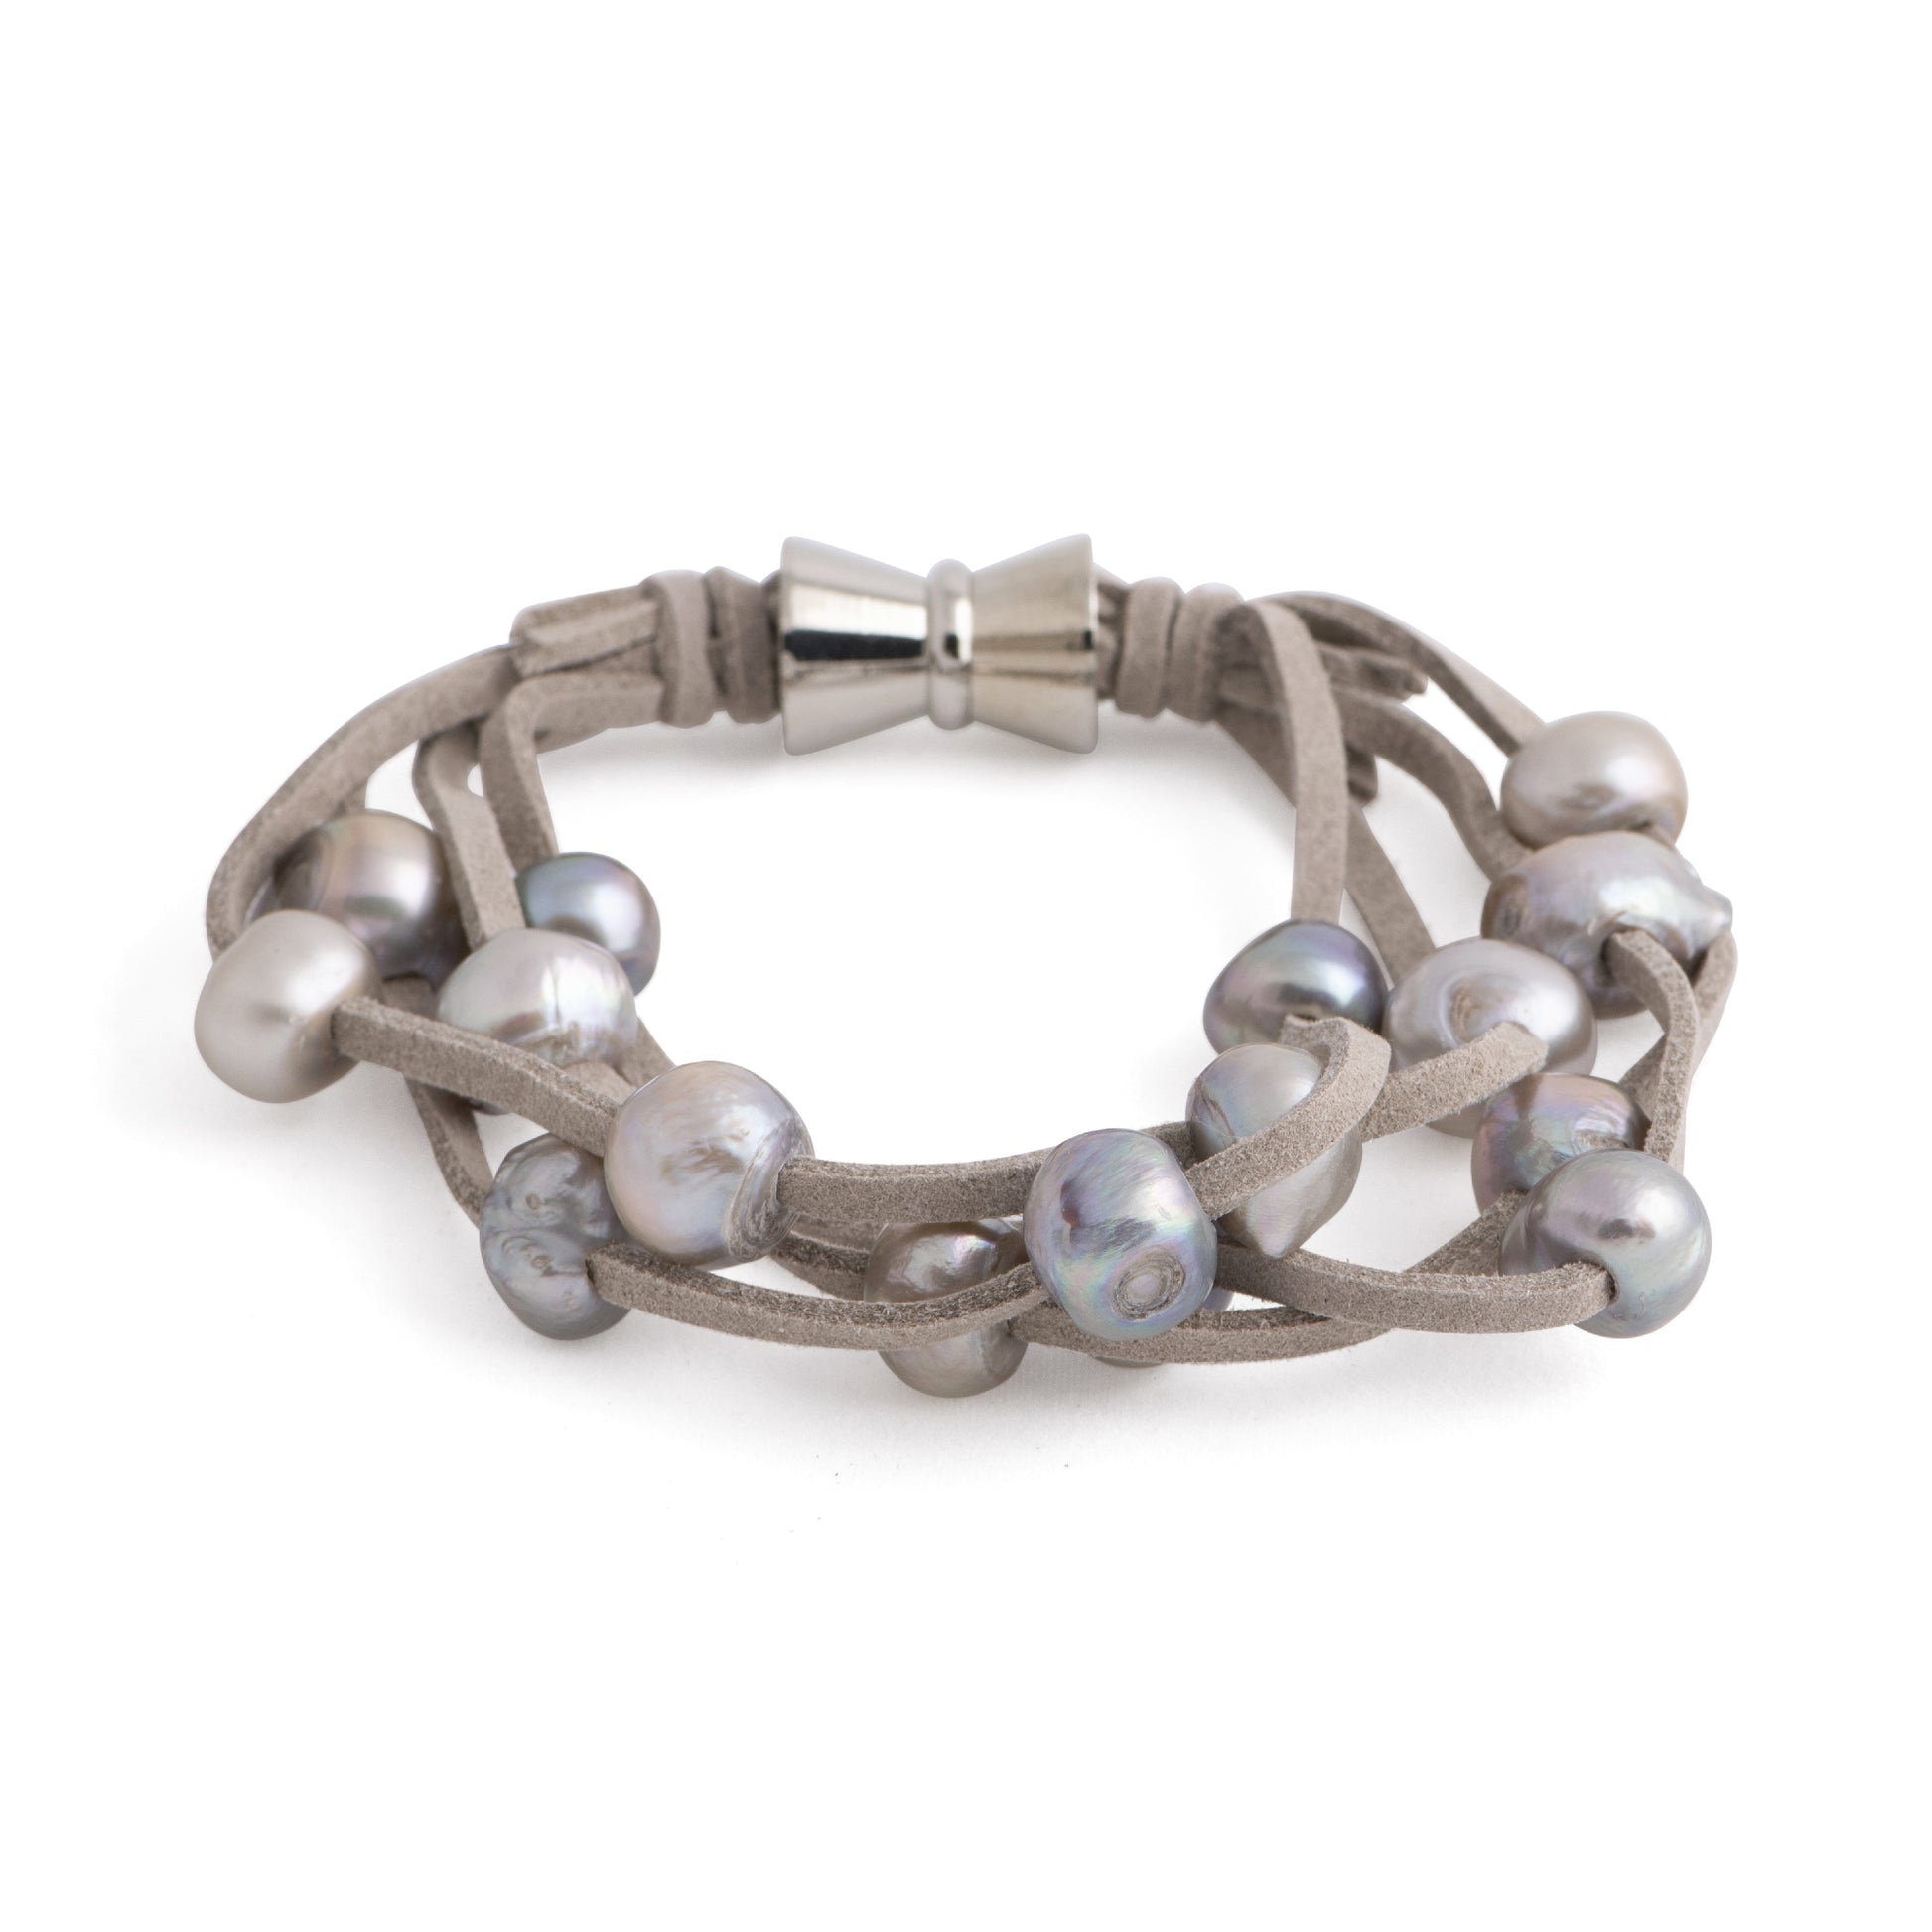 Bengal - Suede multi-layer bracelet with freshwater pearls and magnetic clasp (Light grey suede, silver pearls)